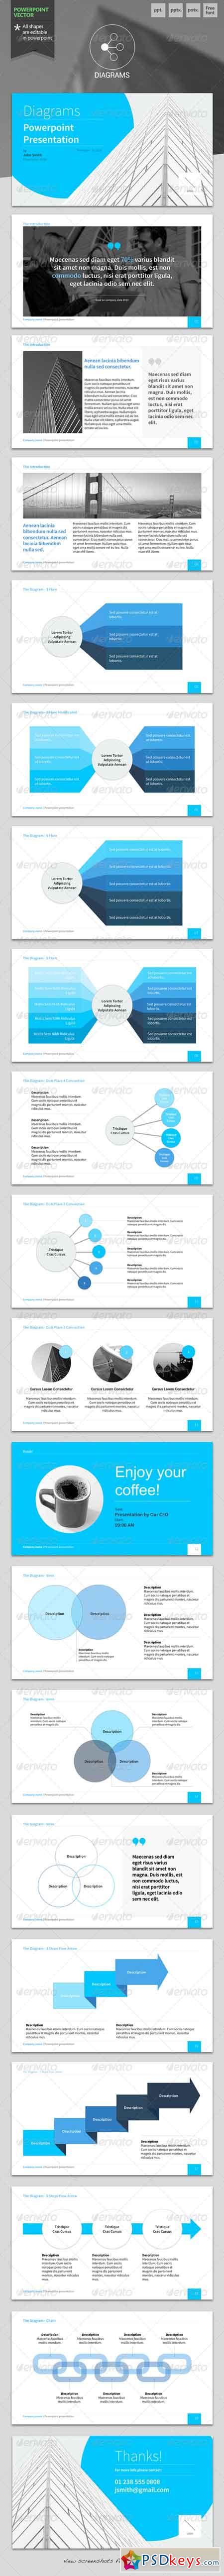 Diagrams - Powerpoint Template 6118326